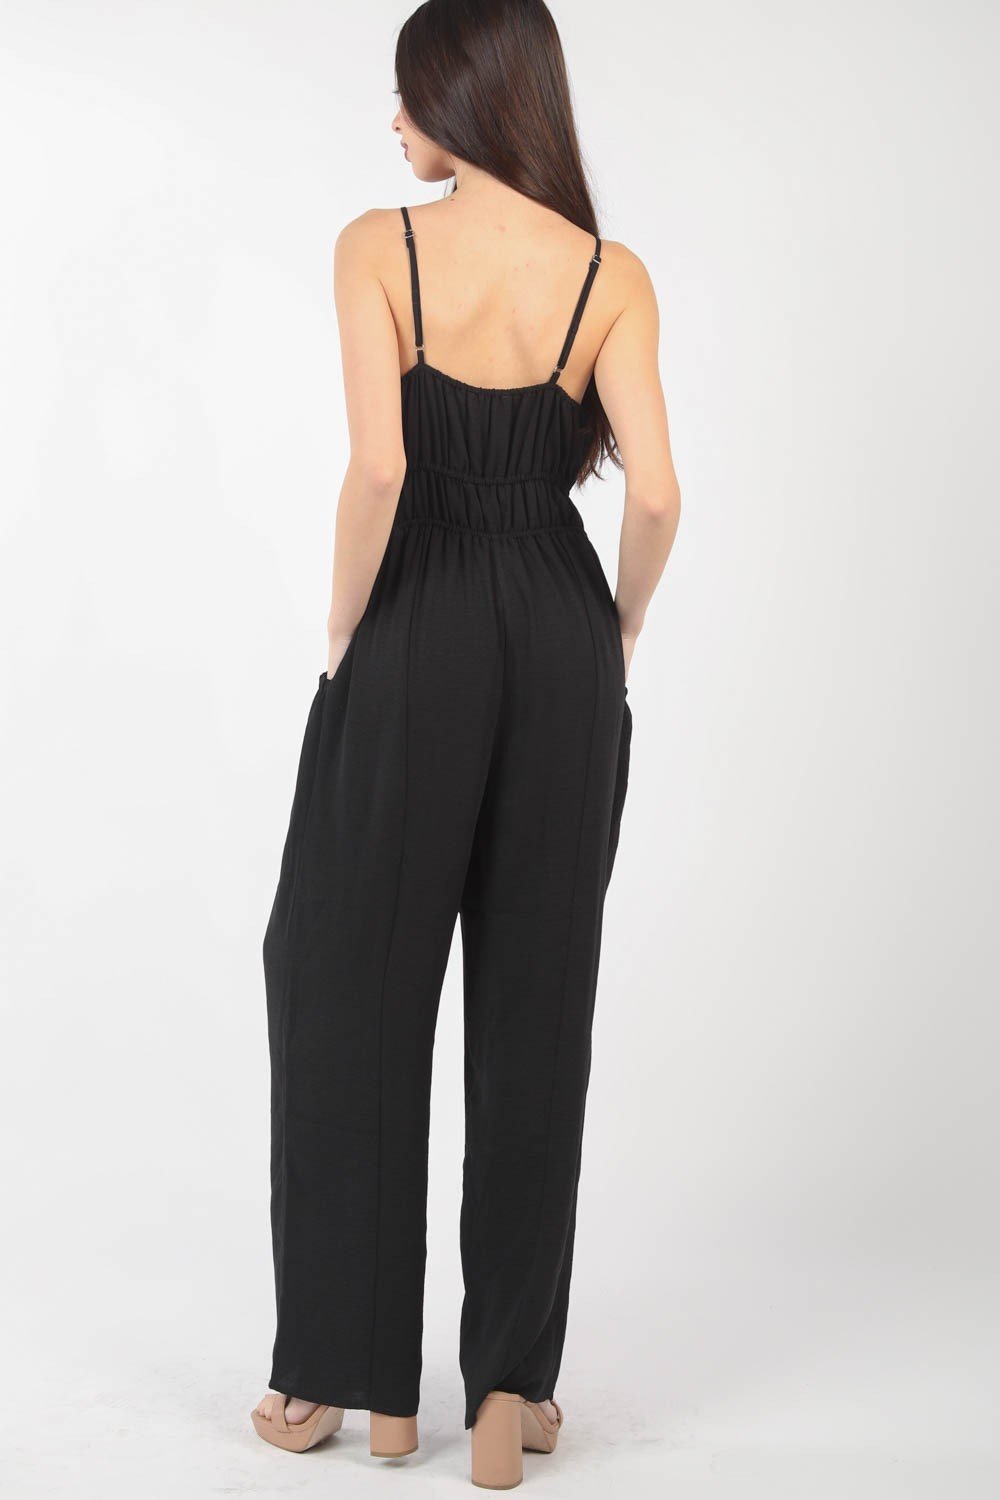 Pintuck Detailed Sleeveless Jumpsuit with a Elegant Touch ??